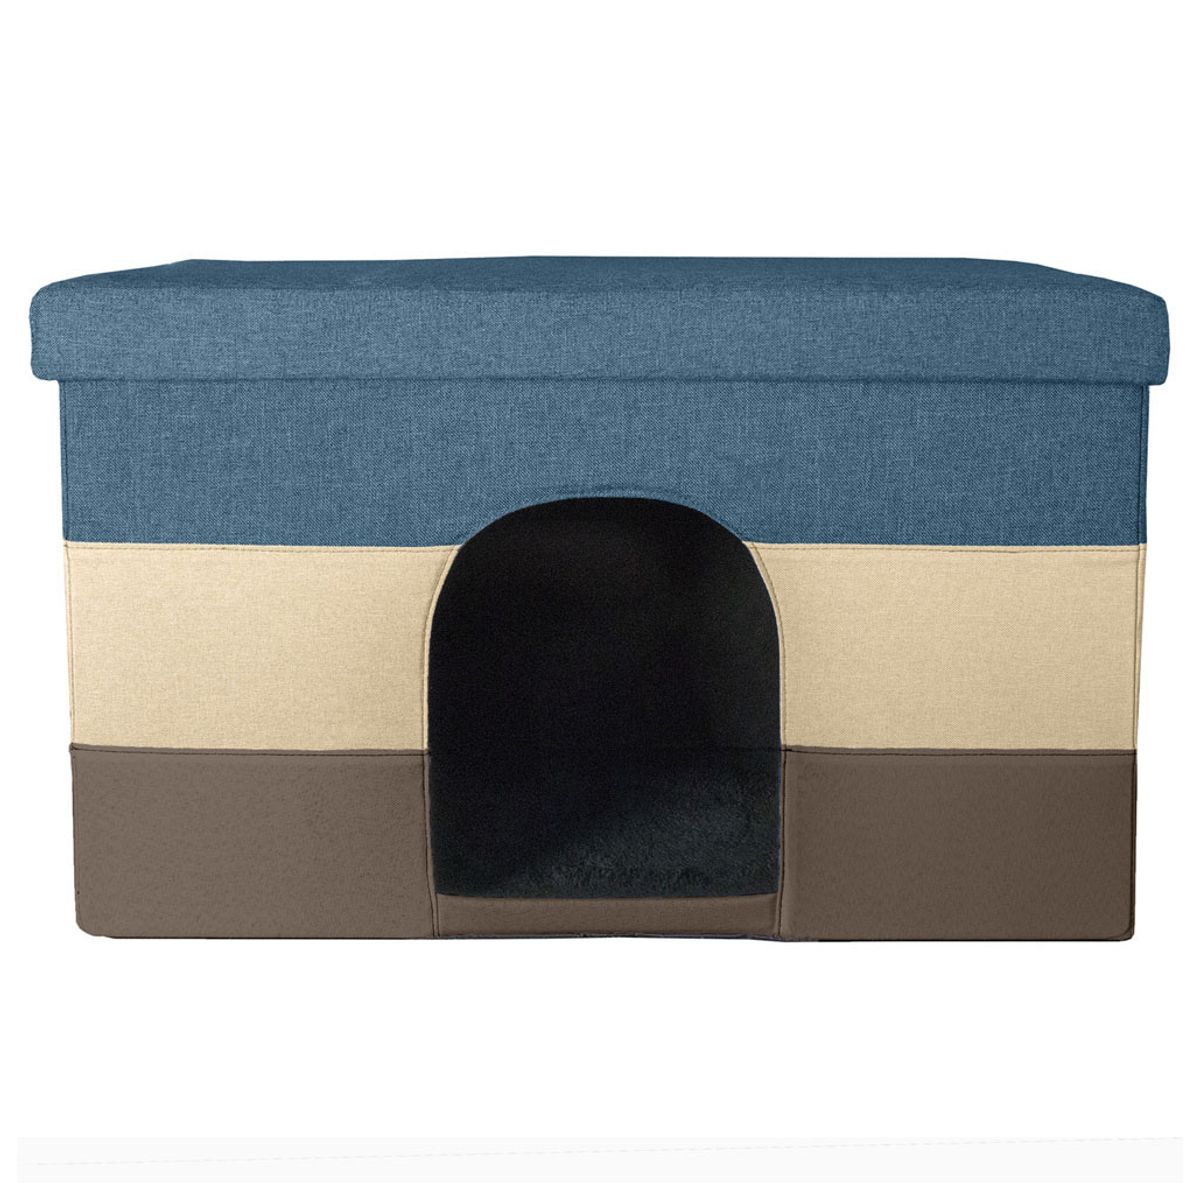 Photos - Dog Bed / Basket FurHaven Pet House Footstool Ottoman - Small - Beach House Stripe 5426329 